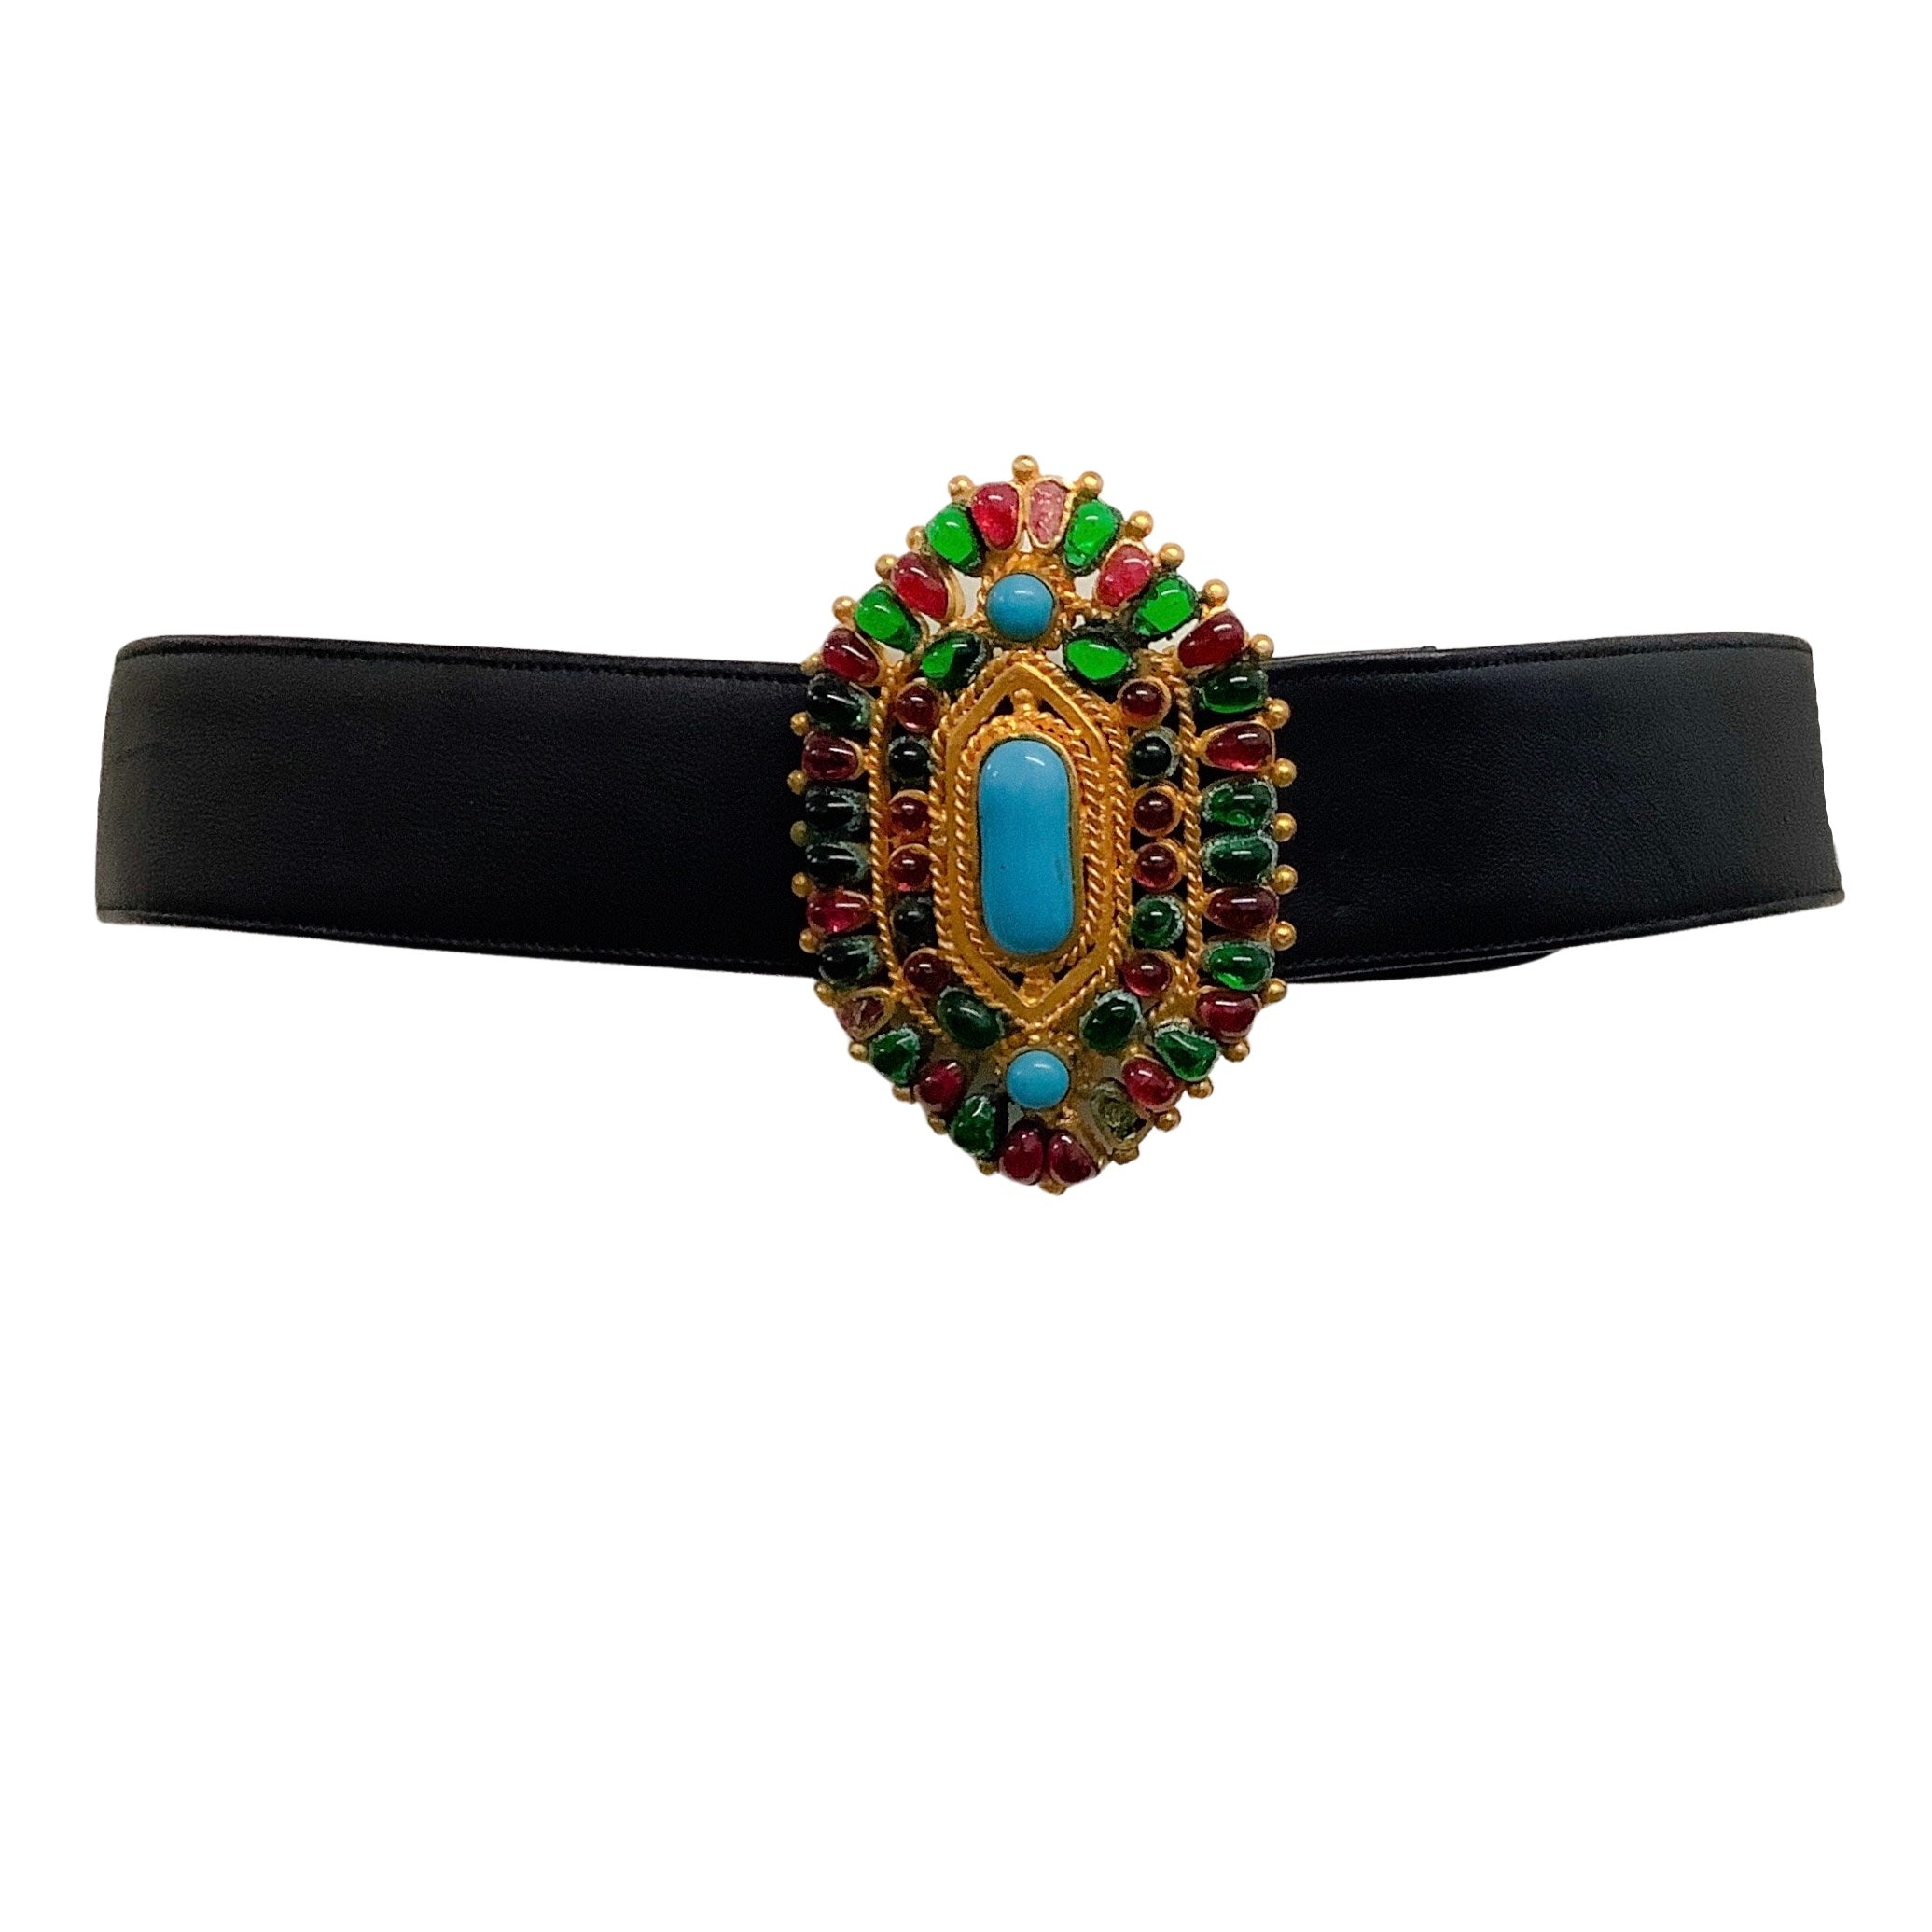 Chanel 1993 Turquoise and Gripoix Black Leather Belt